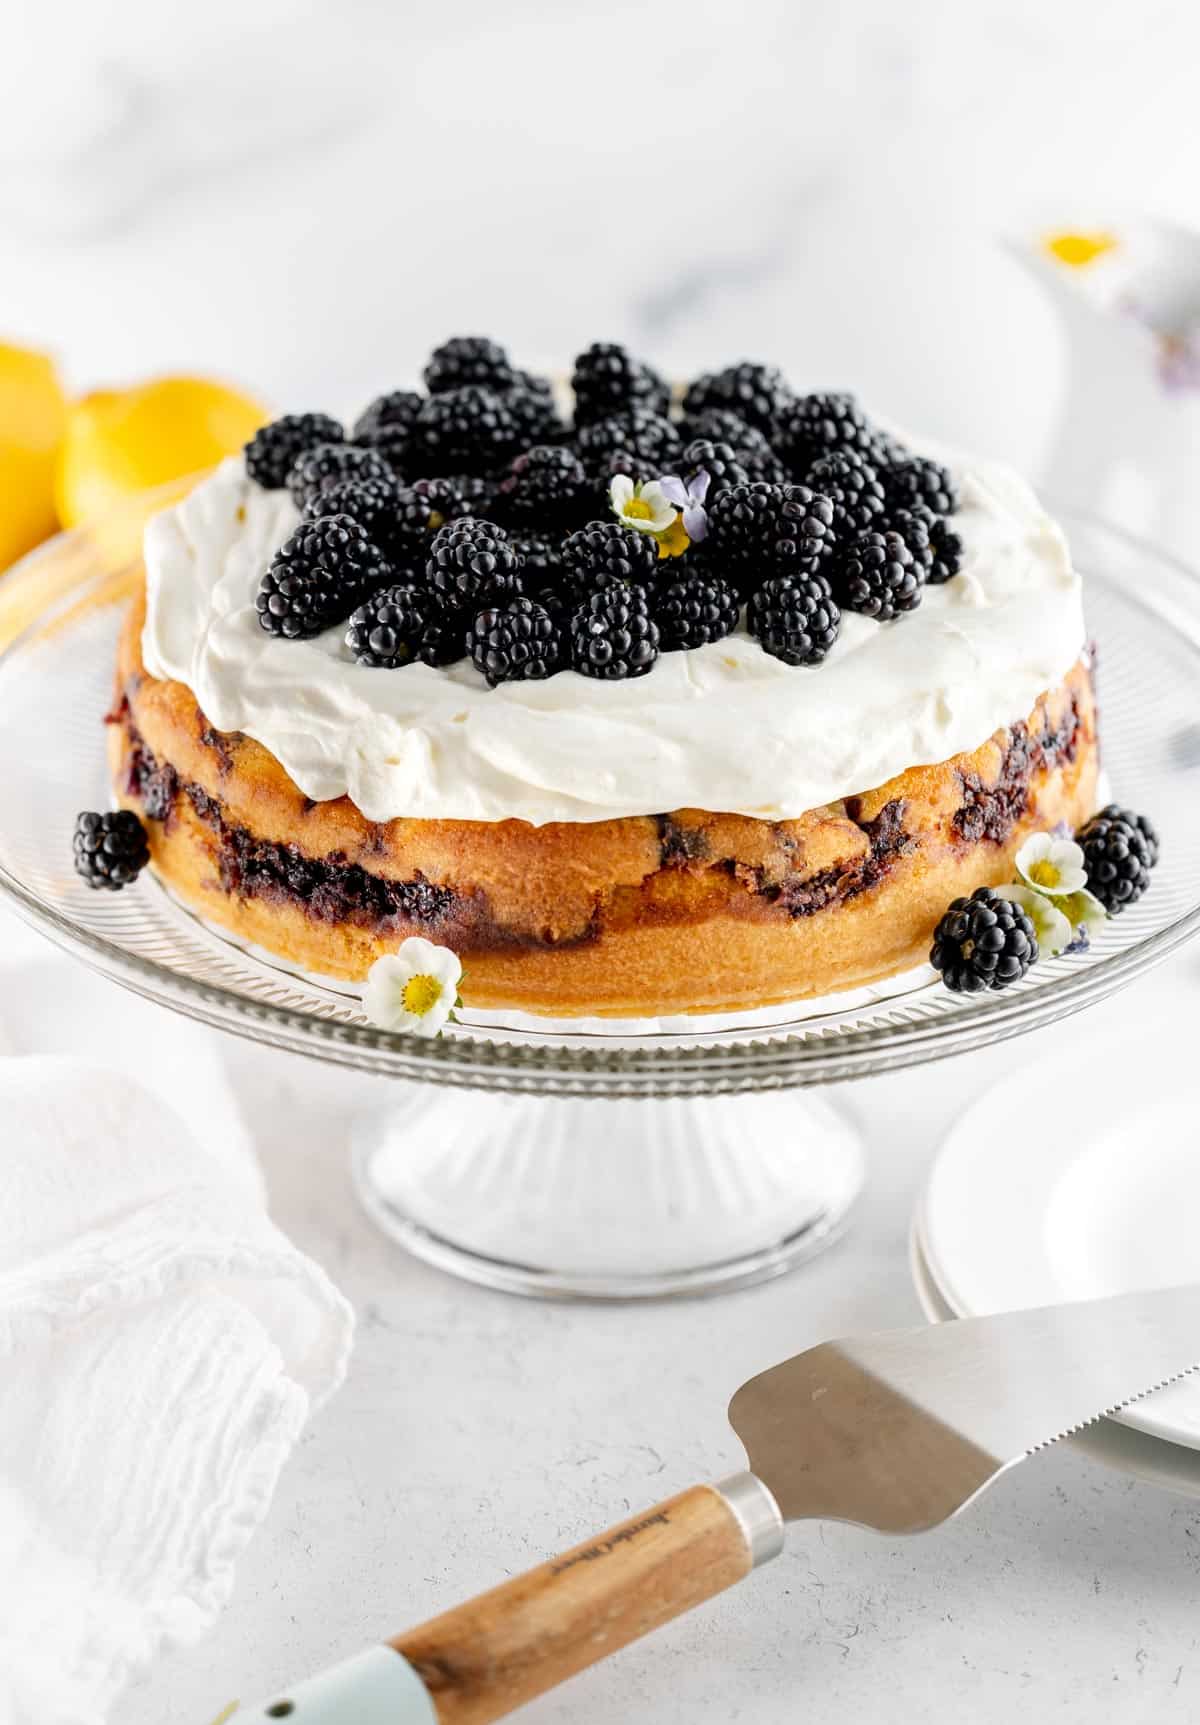 Blackberry Lemon Cake on a cake stand with Lemon Whipped Cream and fresh blackberries. A cake slicer is ready to cut a slice with a stack of plates.